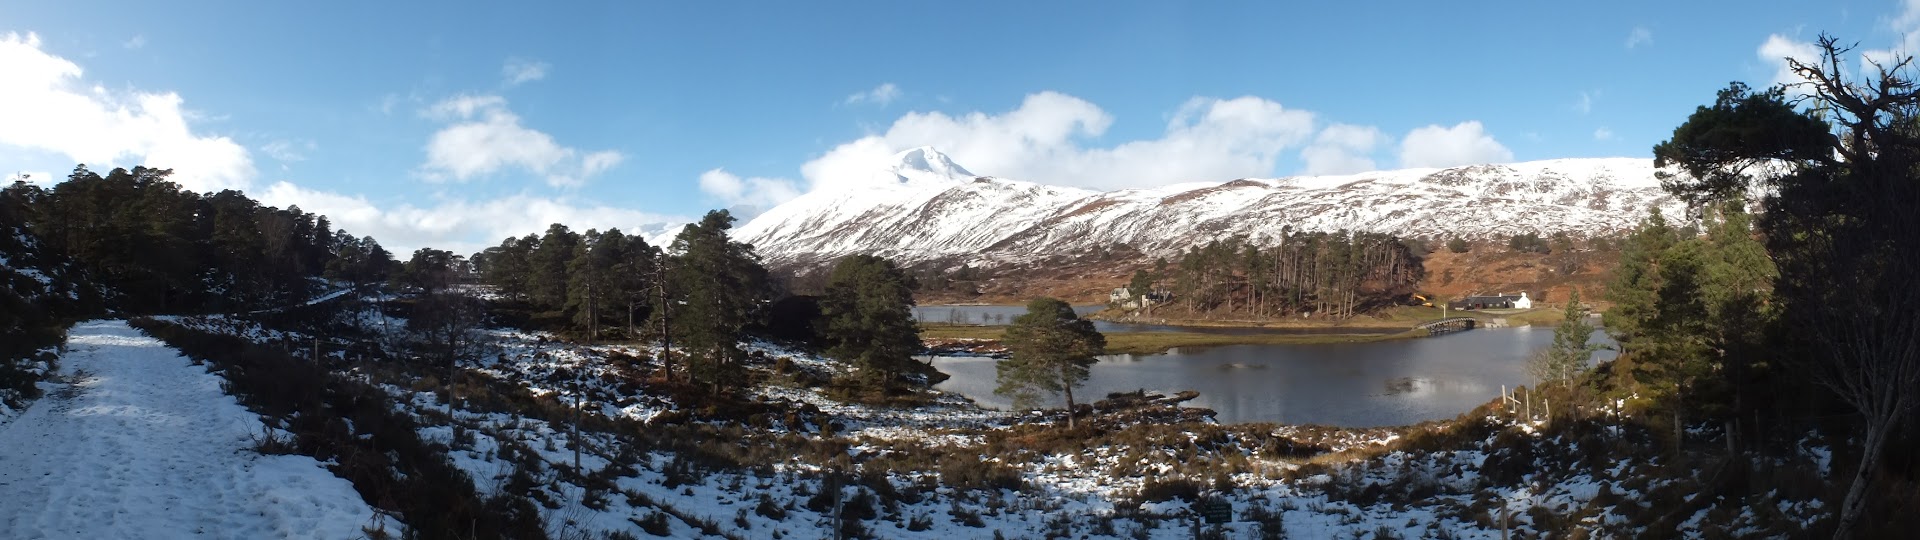 Panorama of a snow-covered woodland trail with a loch and mountains in the background